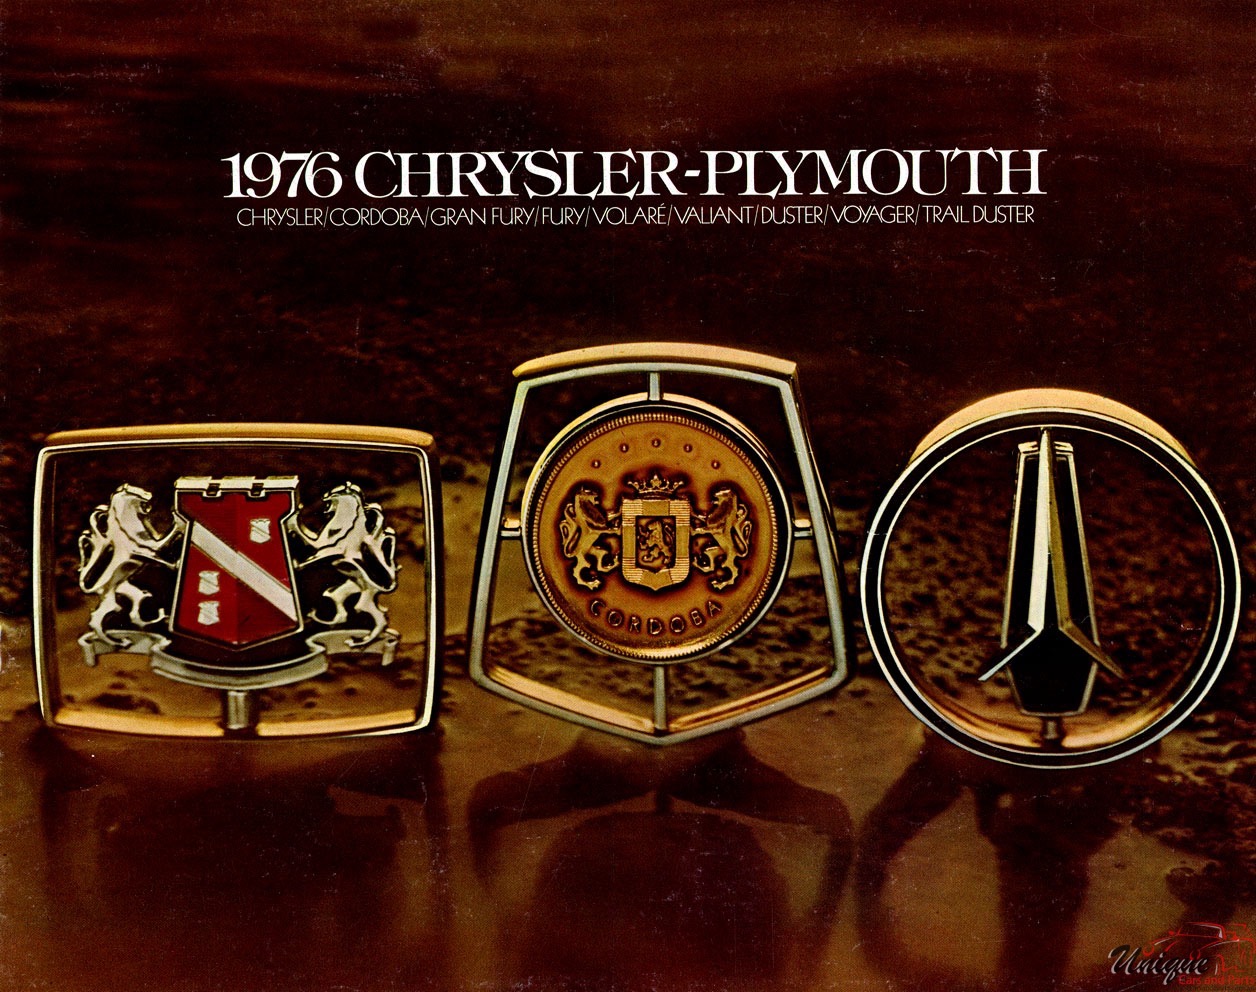 1976 Chrysler-Plymouth Brochure Page 11